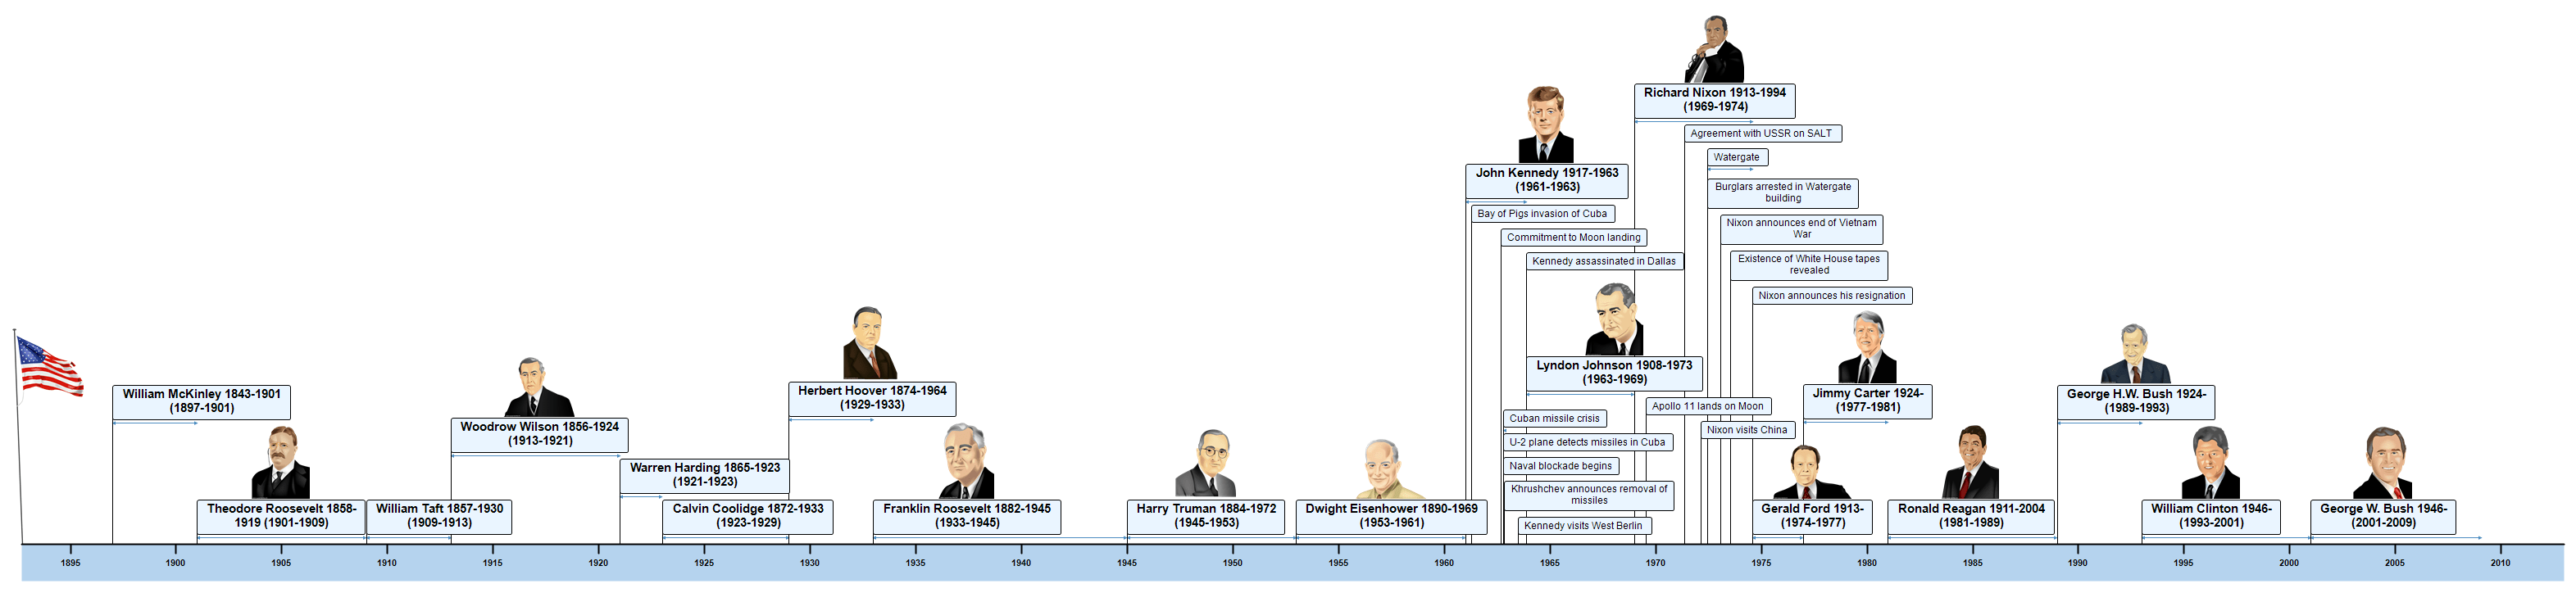 Chronological List of United States Presidents in the 19th Century